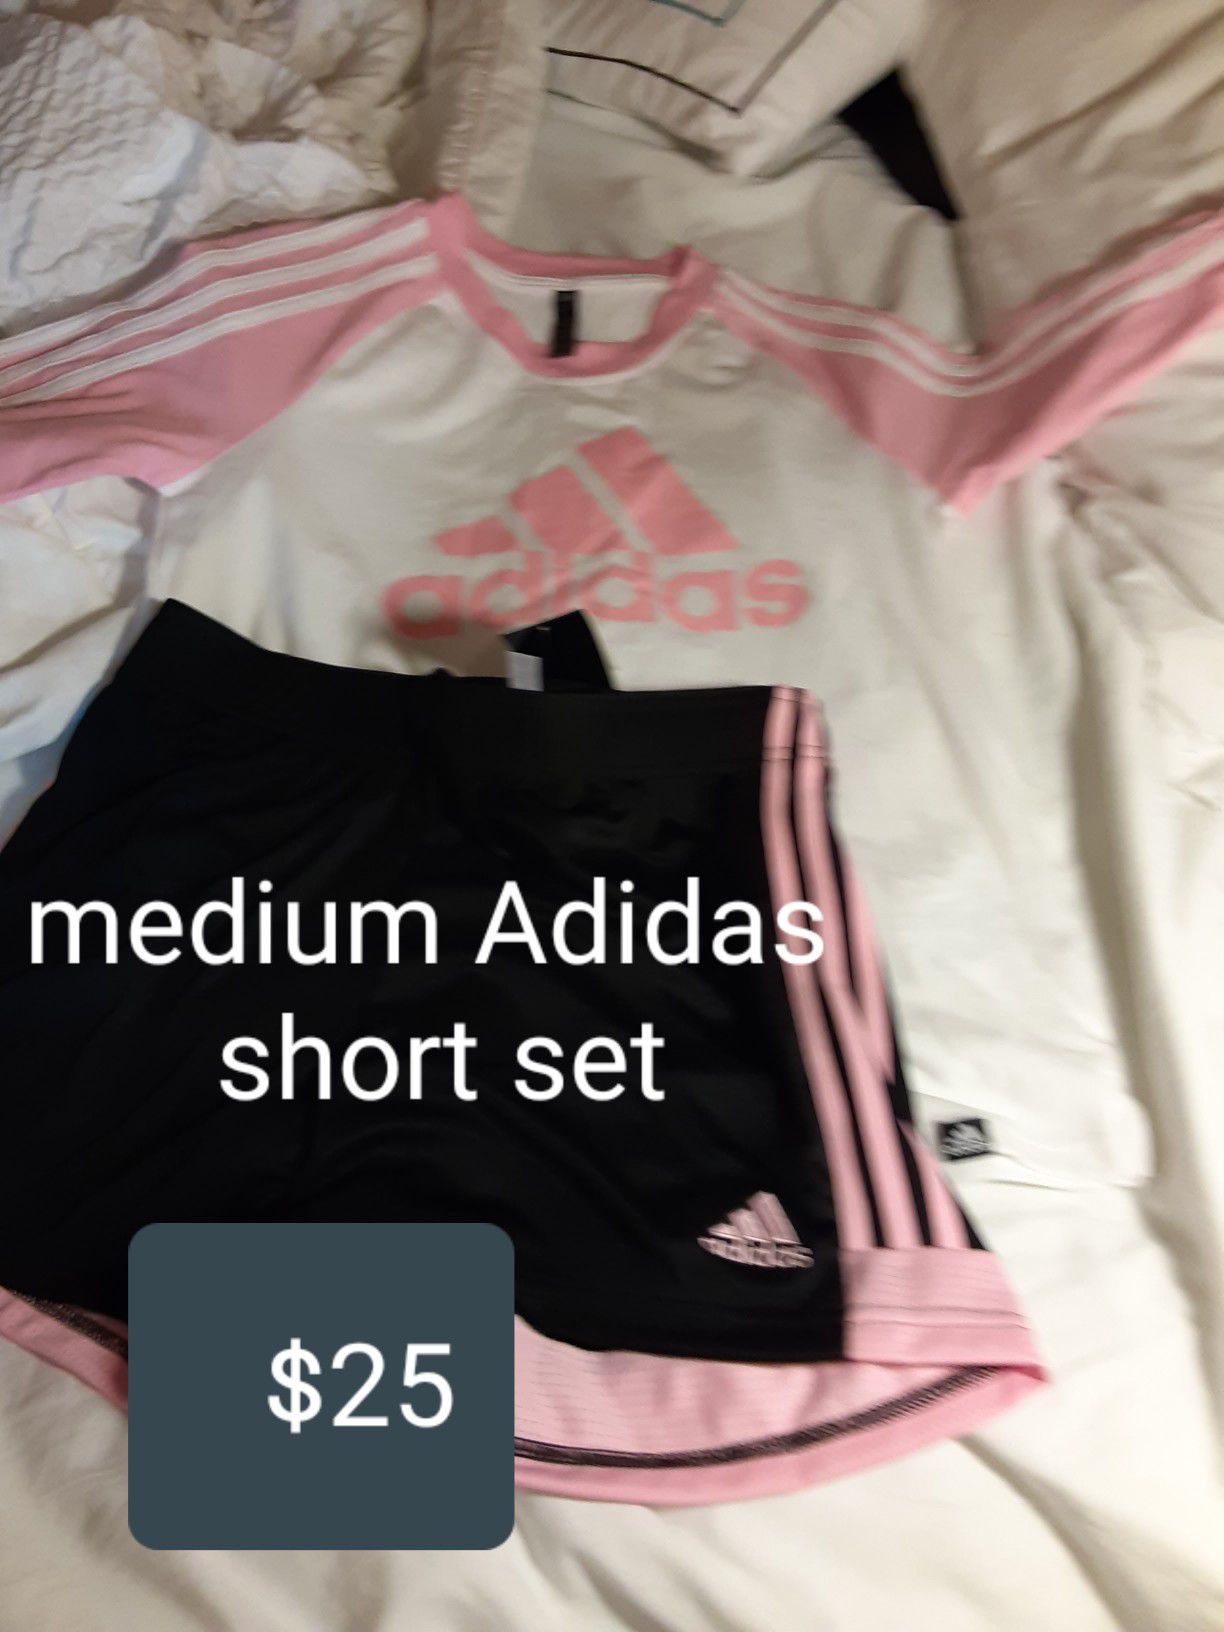 Brand new women's Adidas outfit medium for $25 tags still on